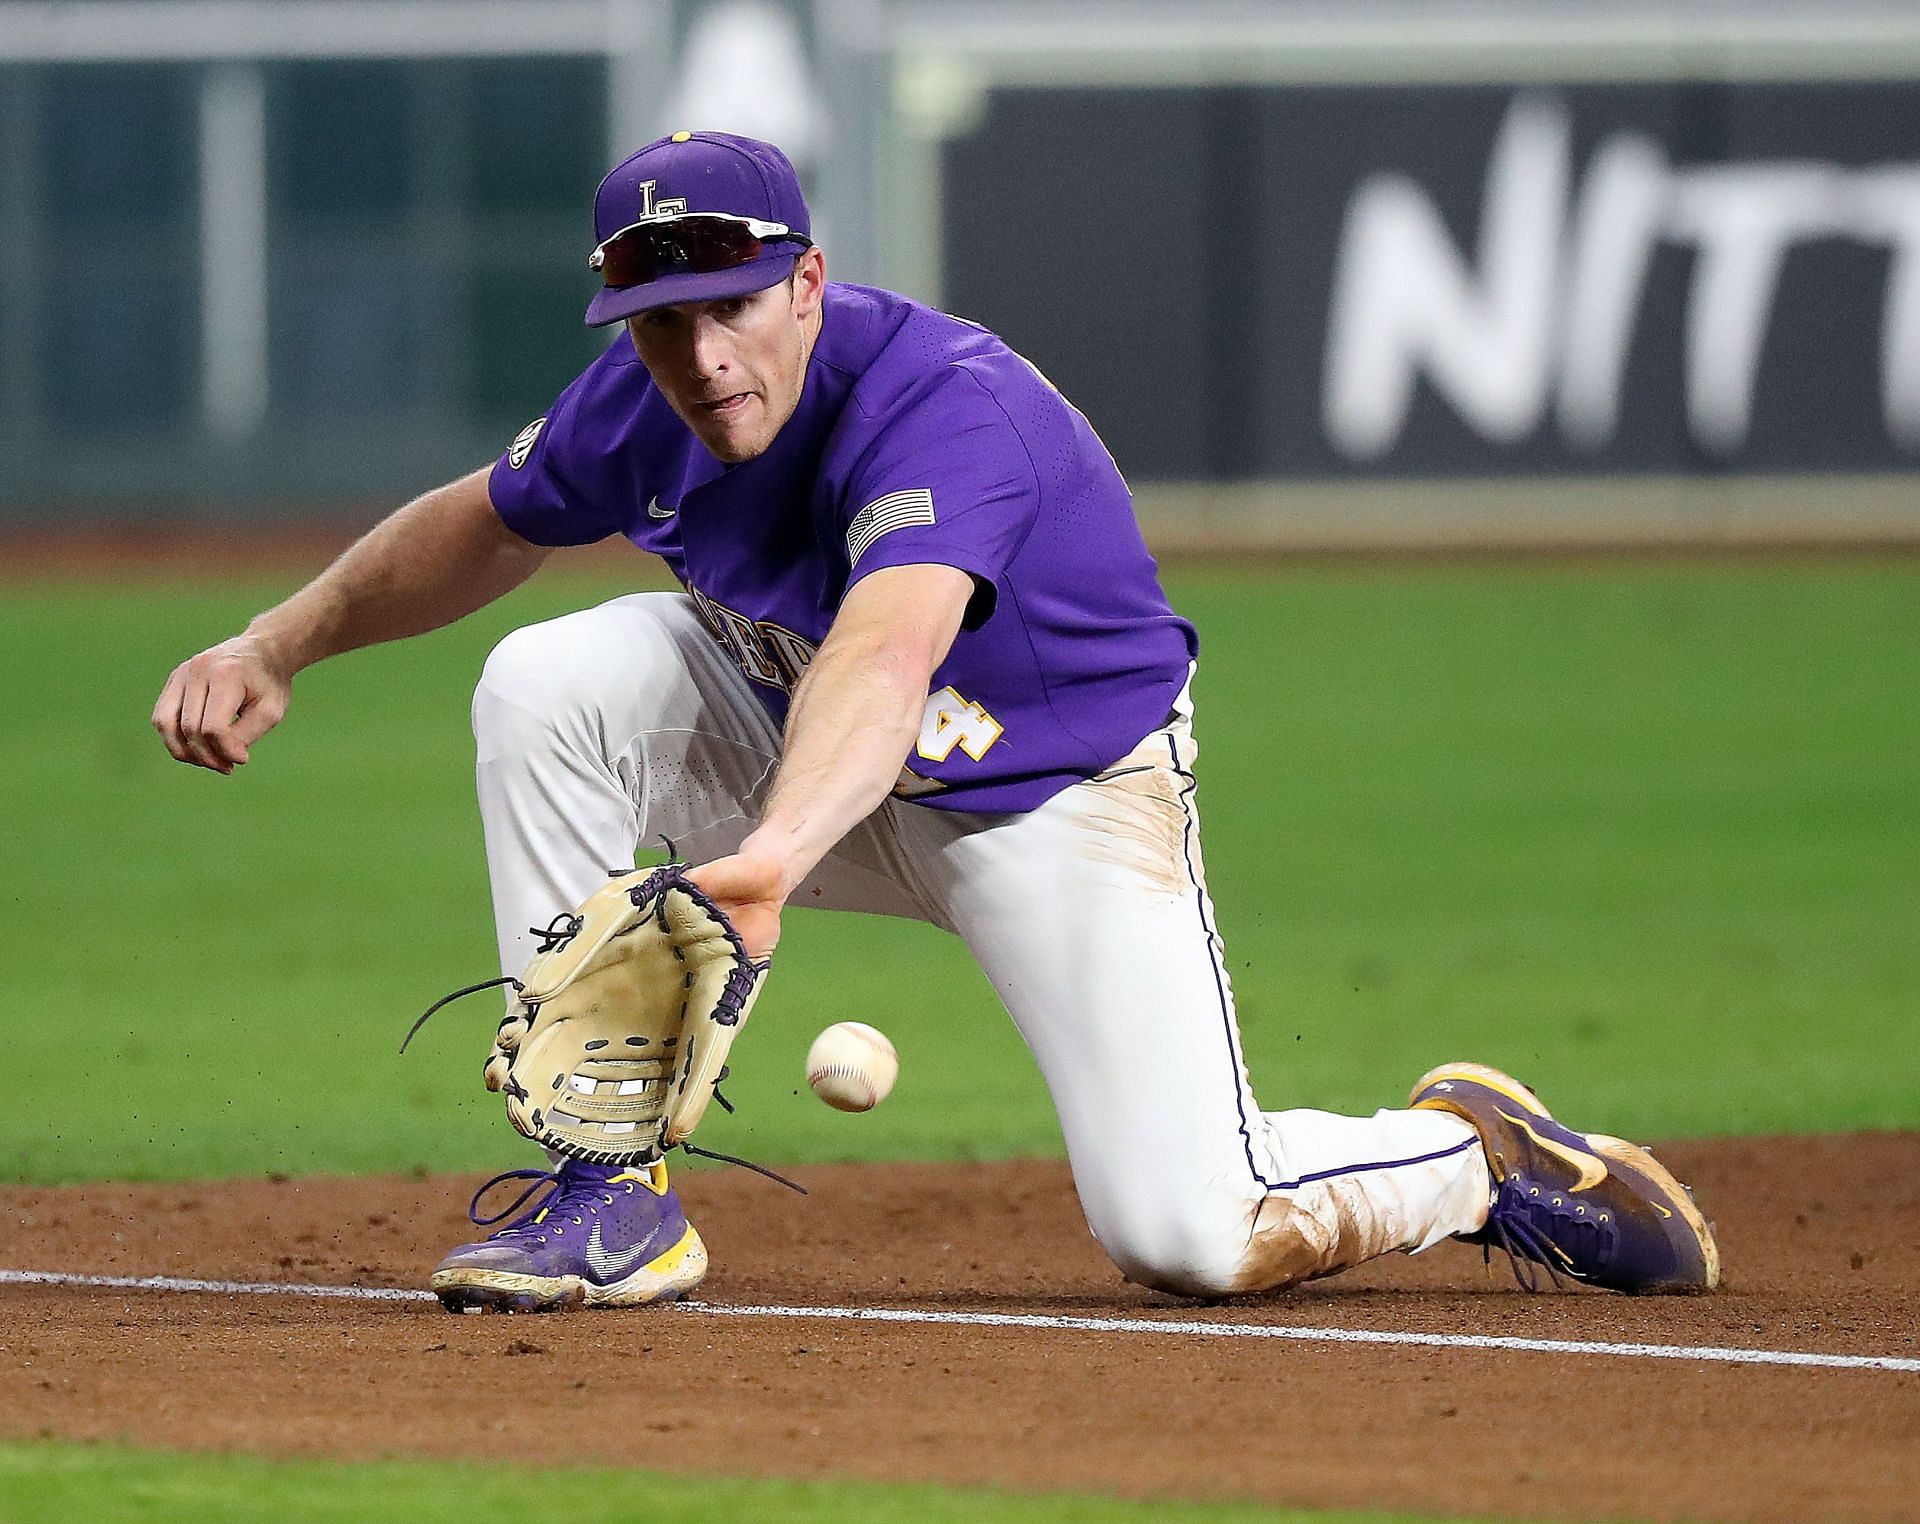 LSU vs. Wake Forest baseball CWS predictions Venue, start time, and TV